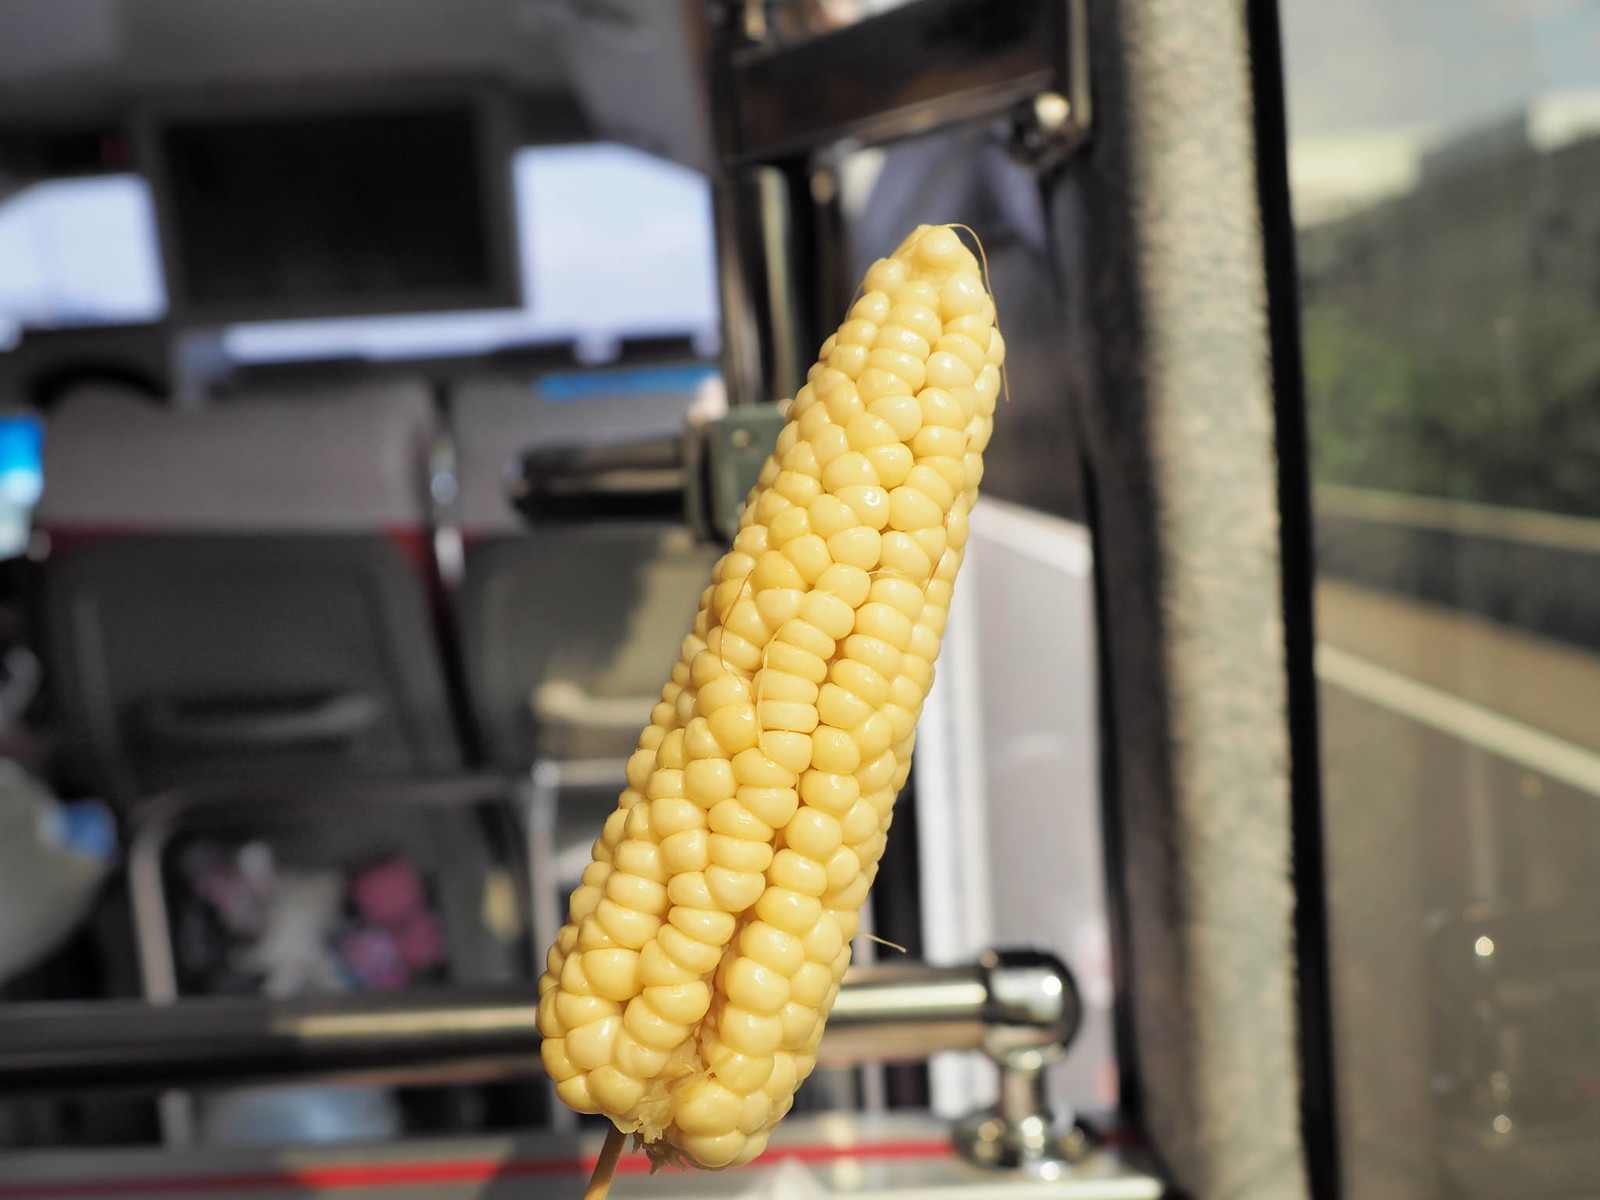 A steamed corn to fill the stomach before the next travel spot.